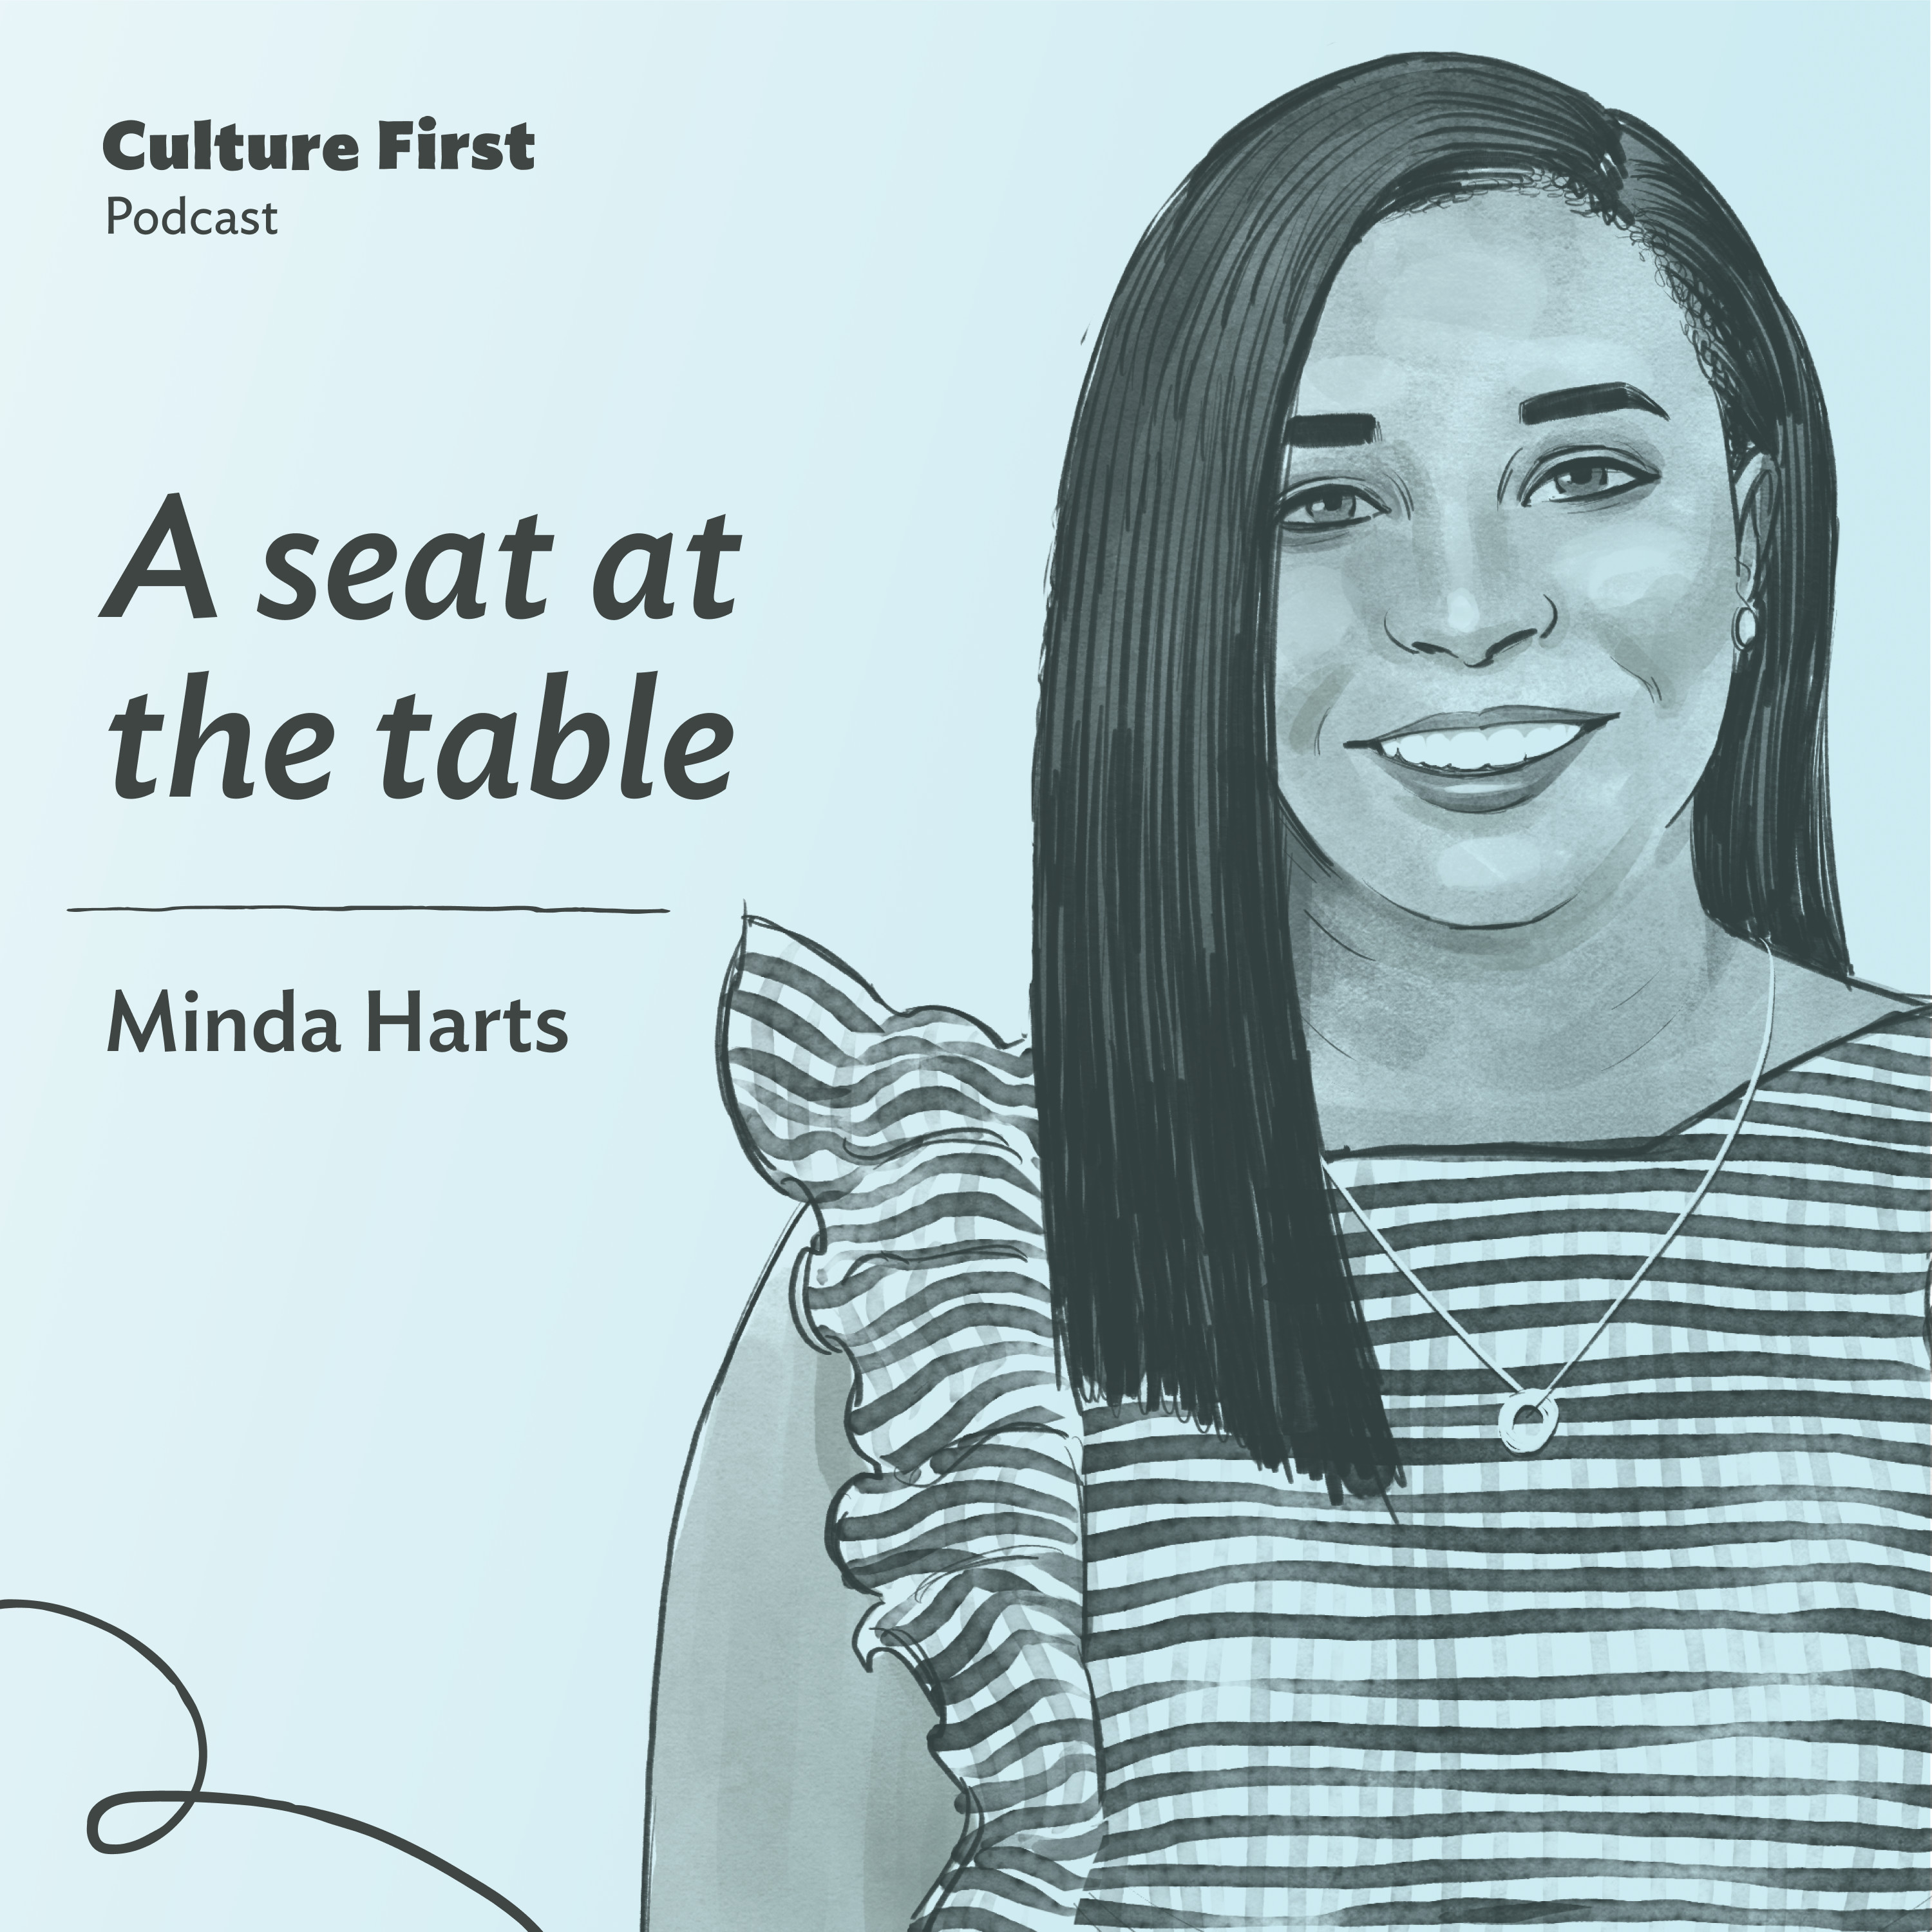 A seat at the table, with Minda Harts